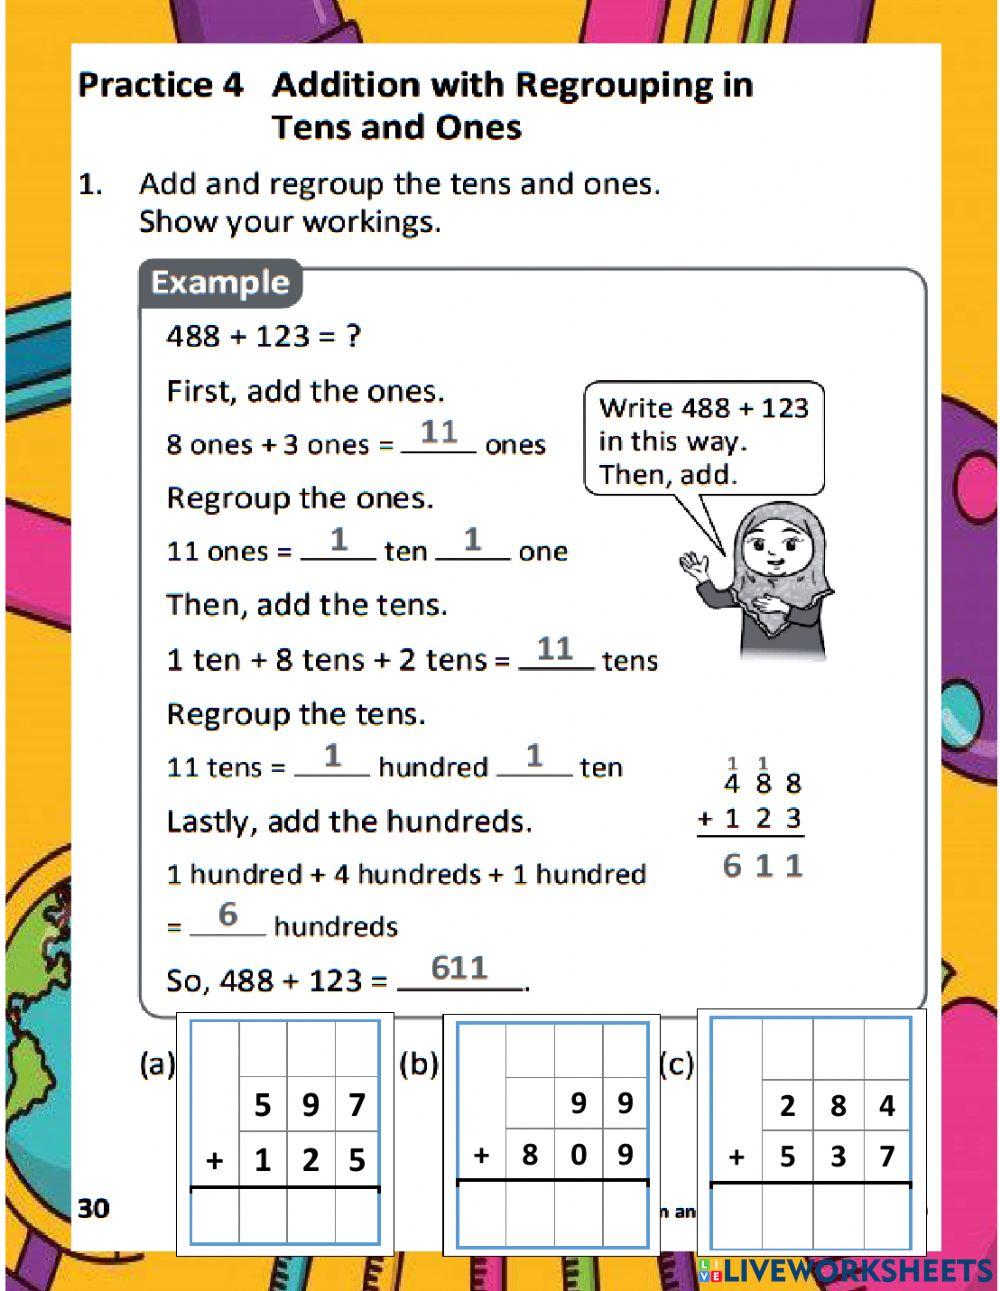 WB p 30 Addition with regrouping tens and ones